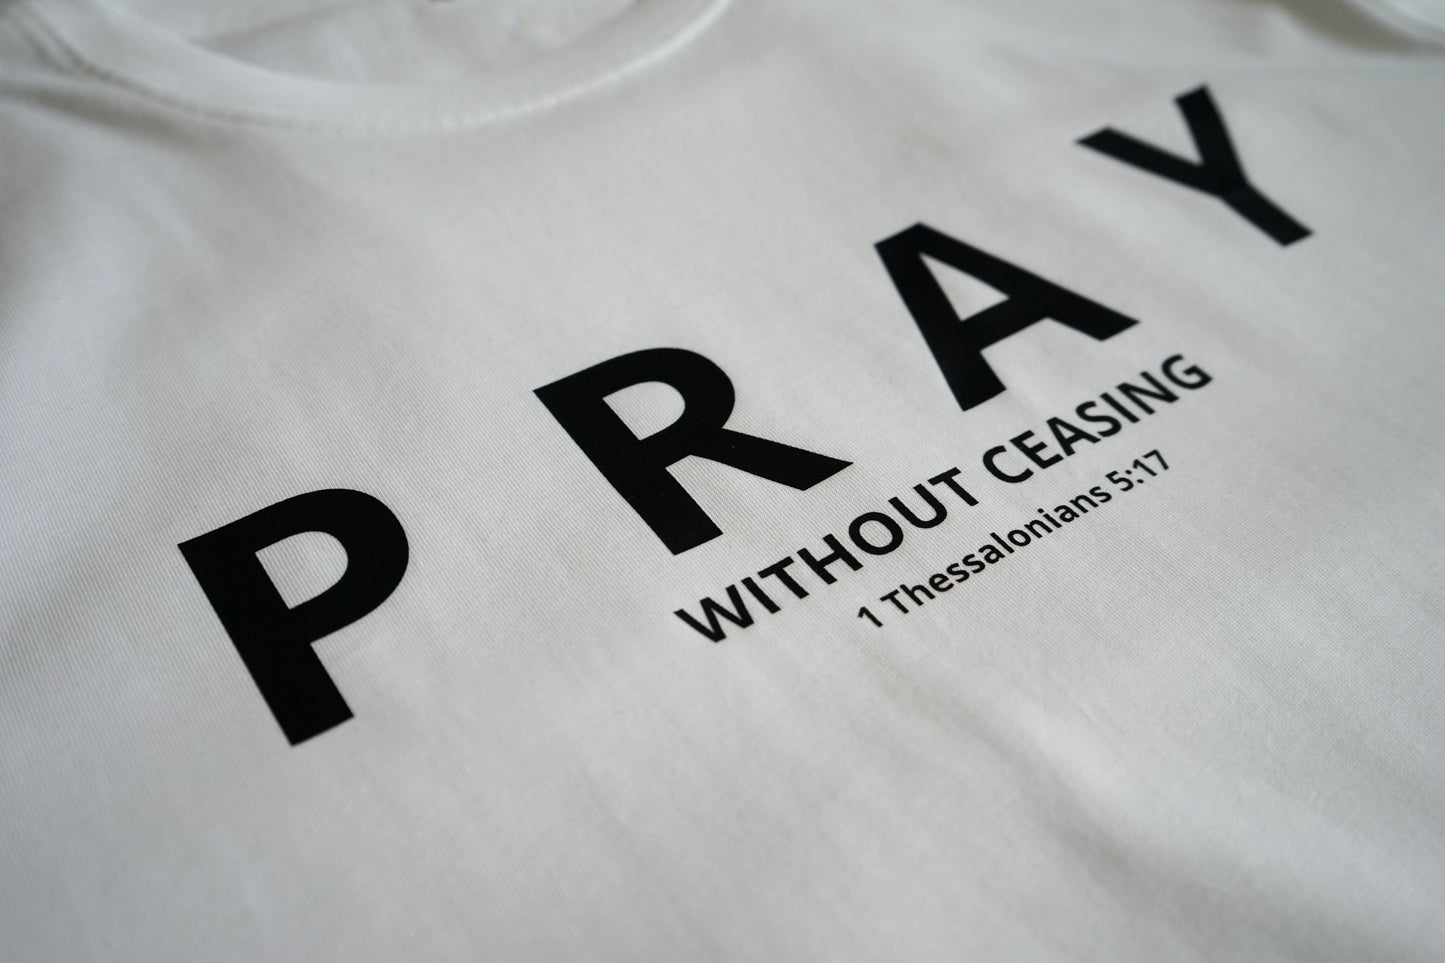 Pray without ceasing - white tee